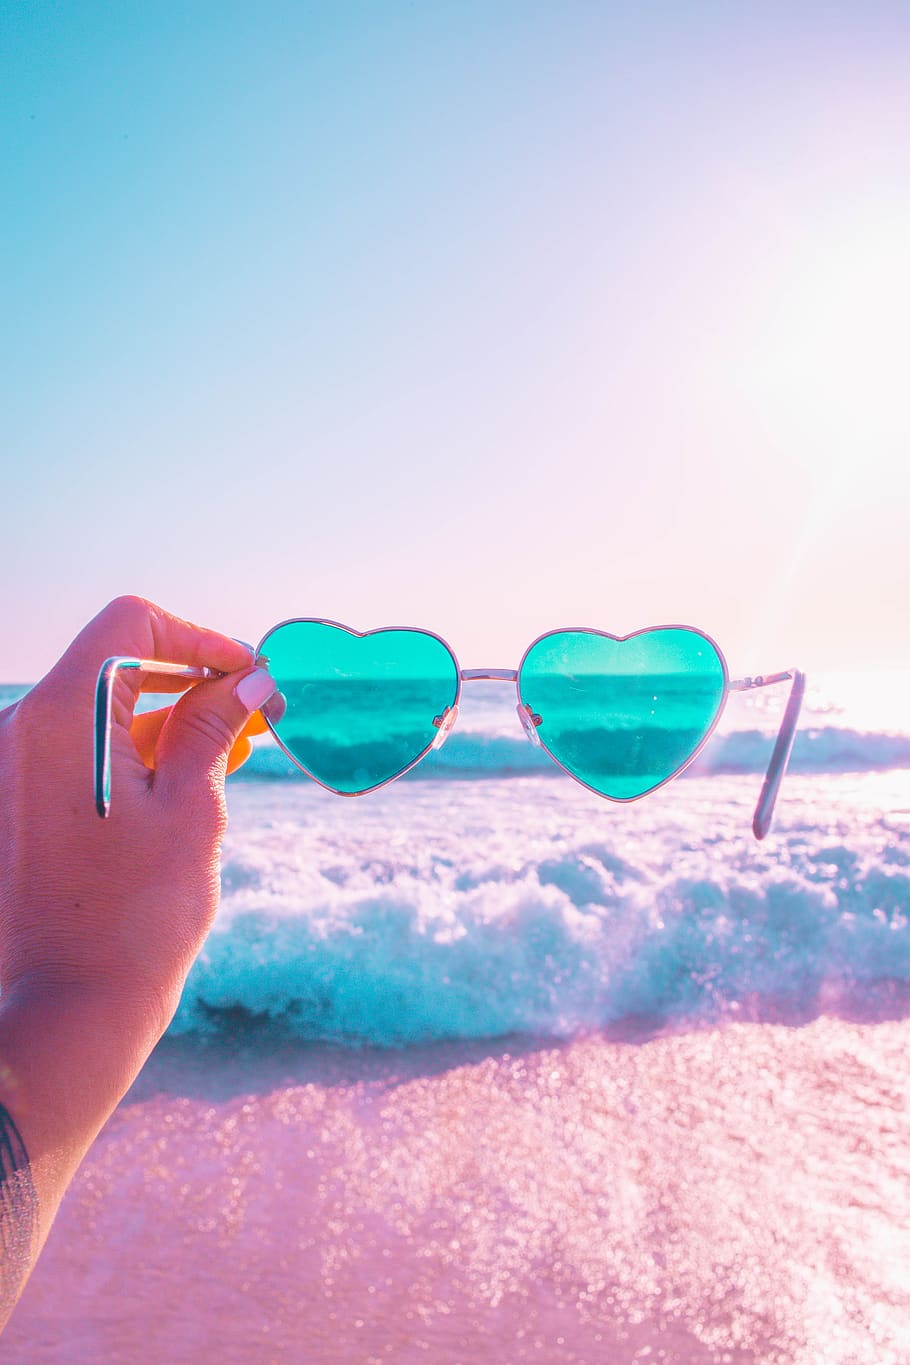 Person Holding Heart Shaped Teal Sunglasses With Silver - My Life Change - HD Wallpaper 